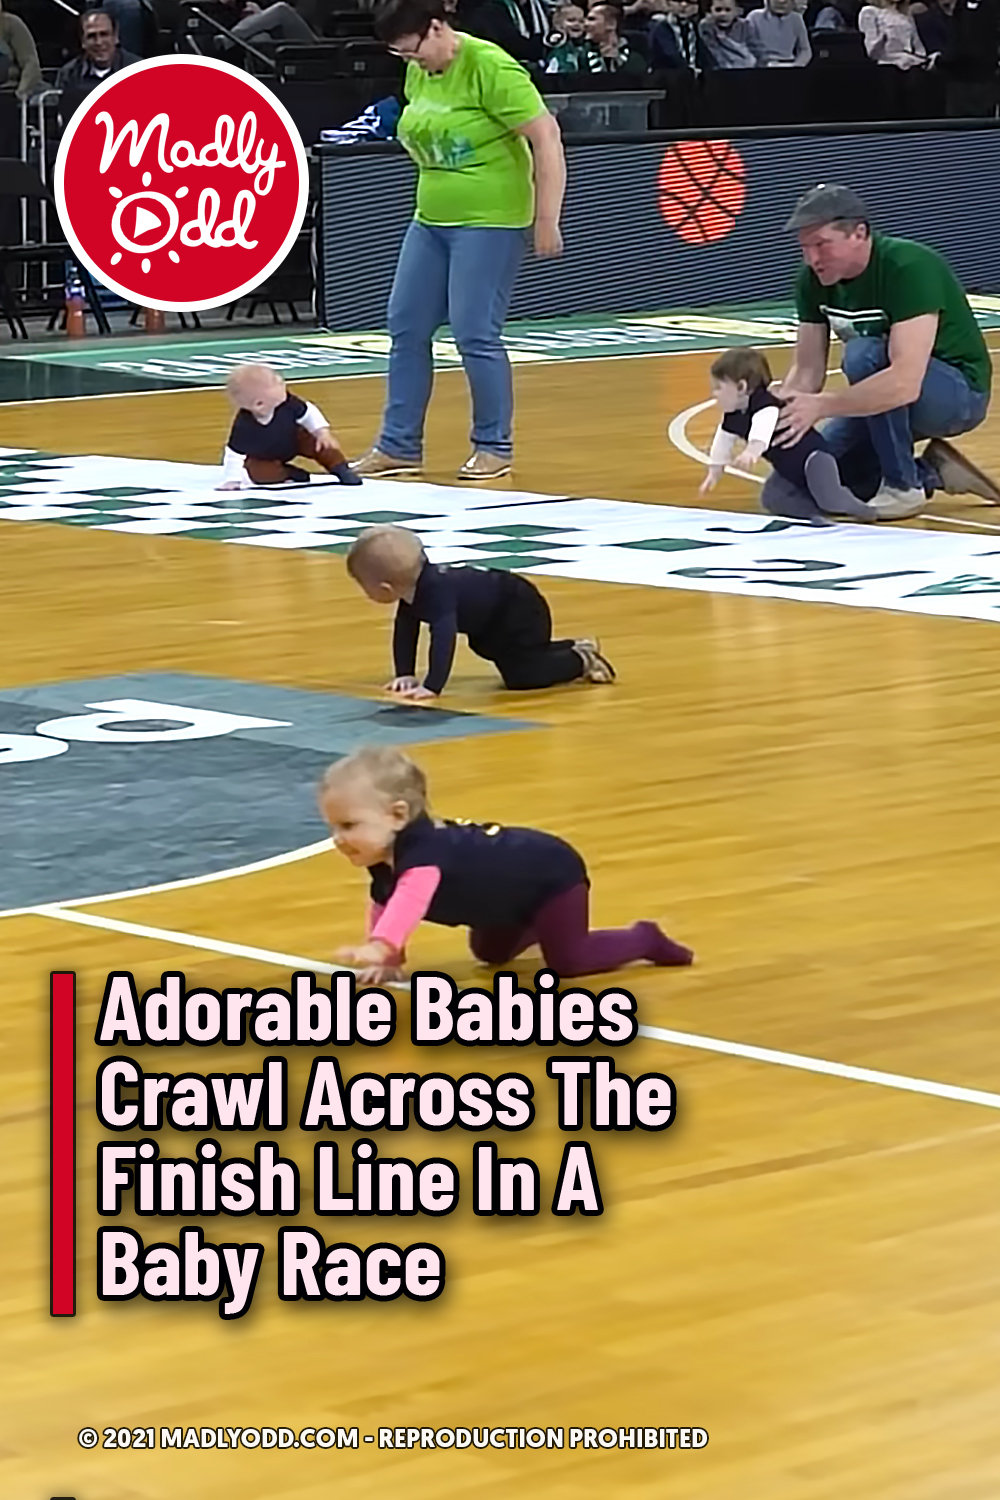 Adorable Babies Crawl Across The Finish Line In A Baby Race